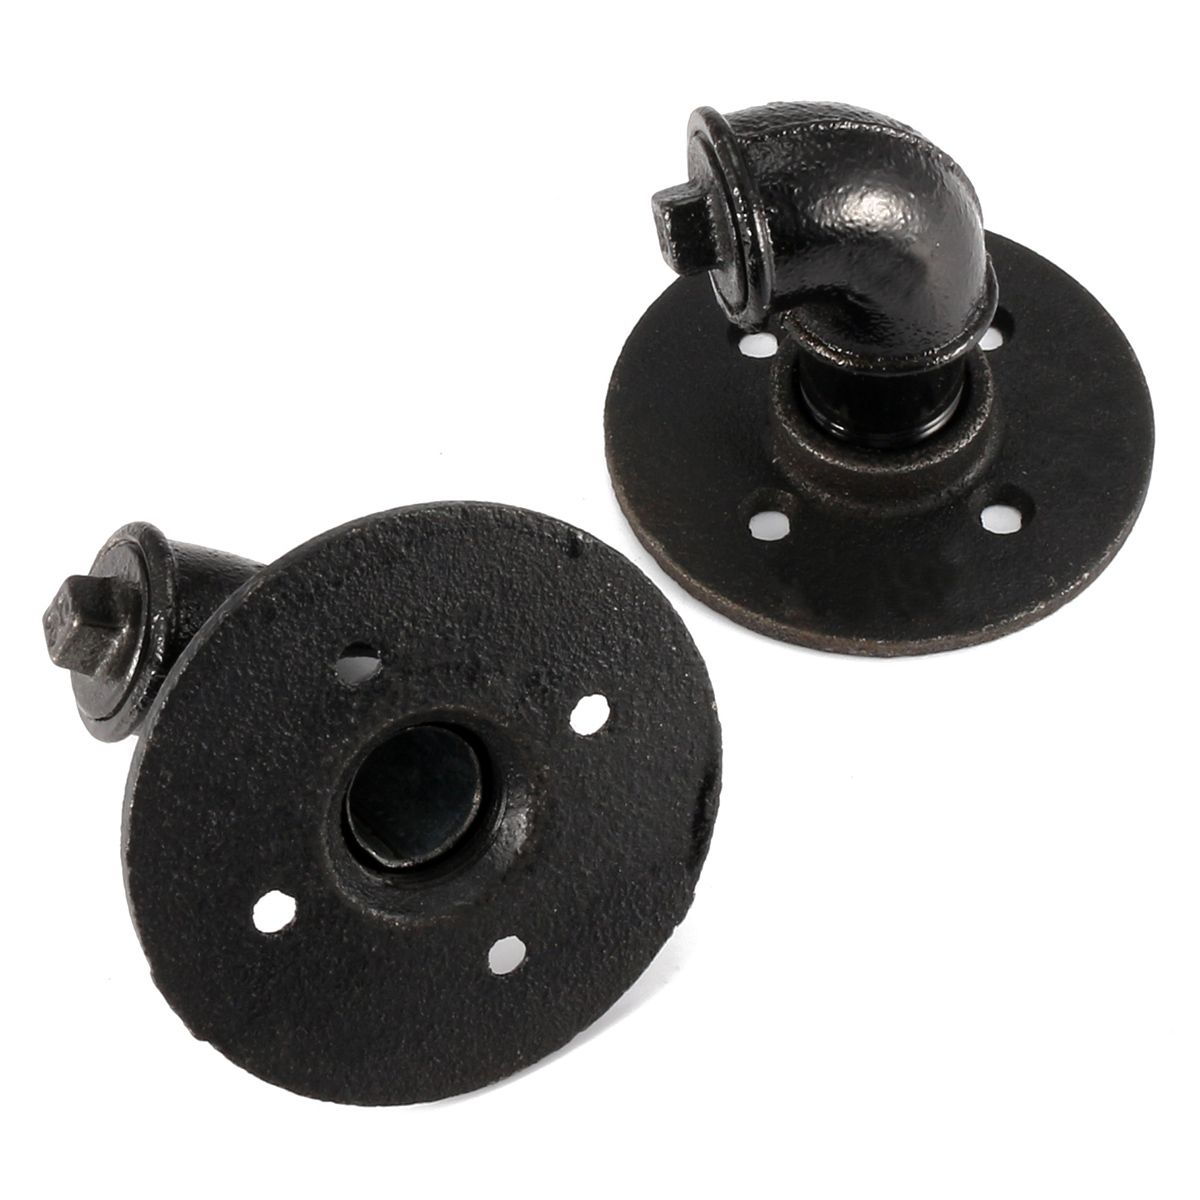 2Pcs--Black-Iron-Industrial-Pipe-Hooks-for-Coat-Towel-Dressing-Gown-1146305